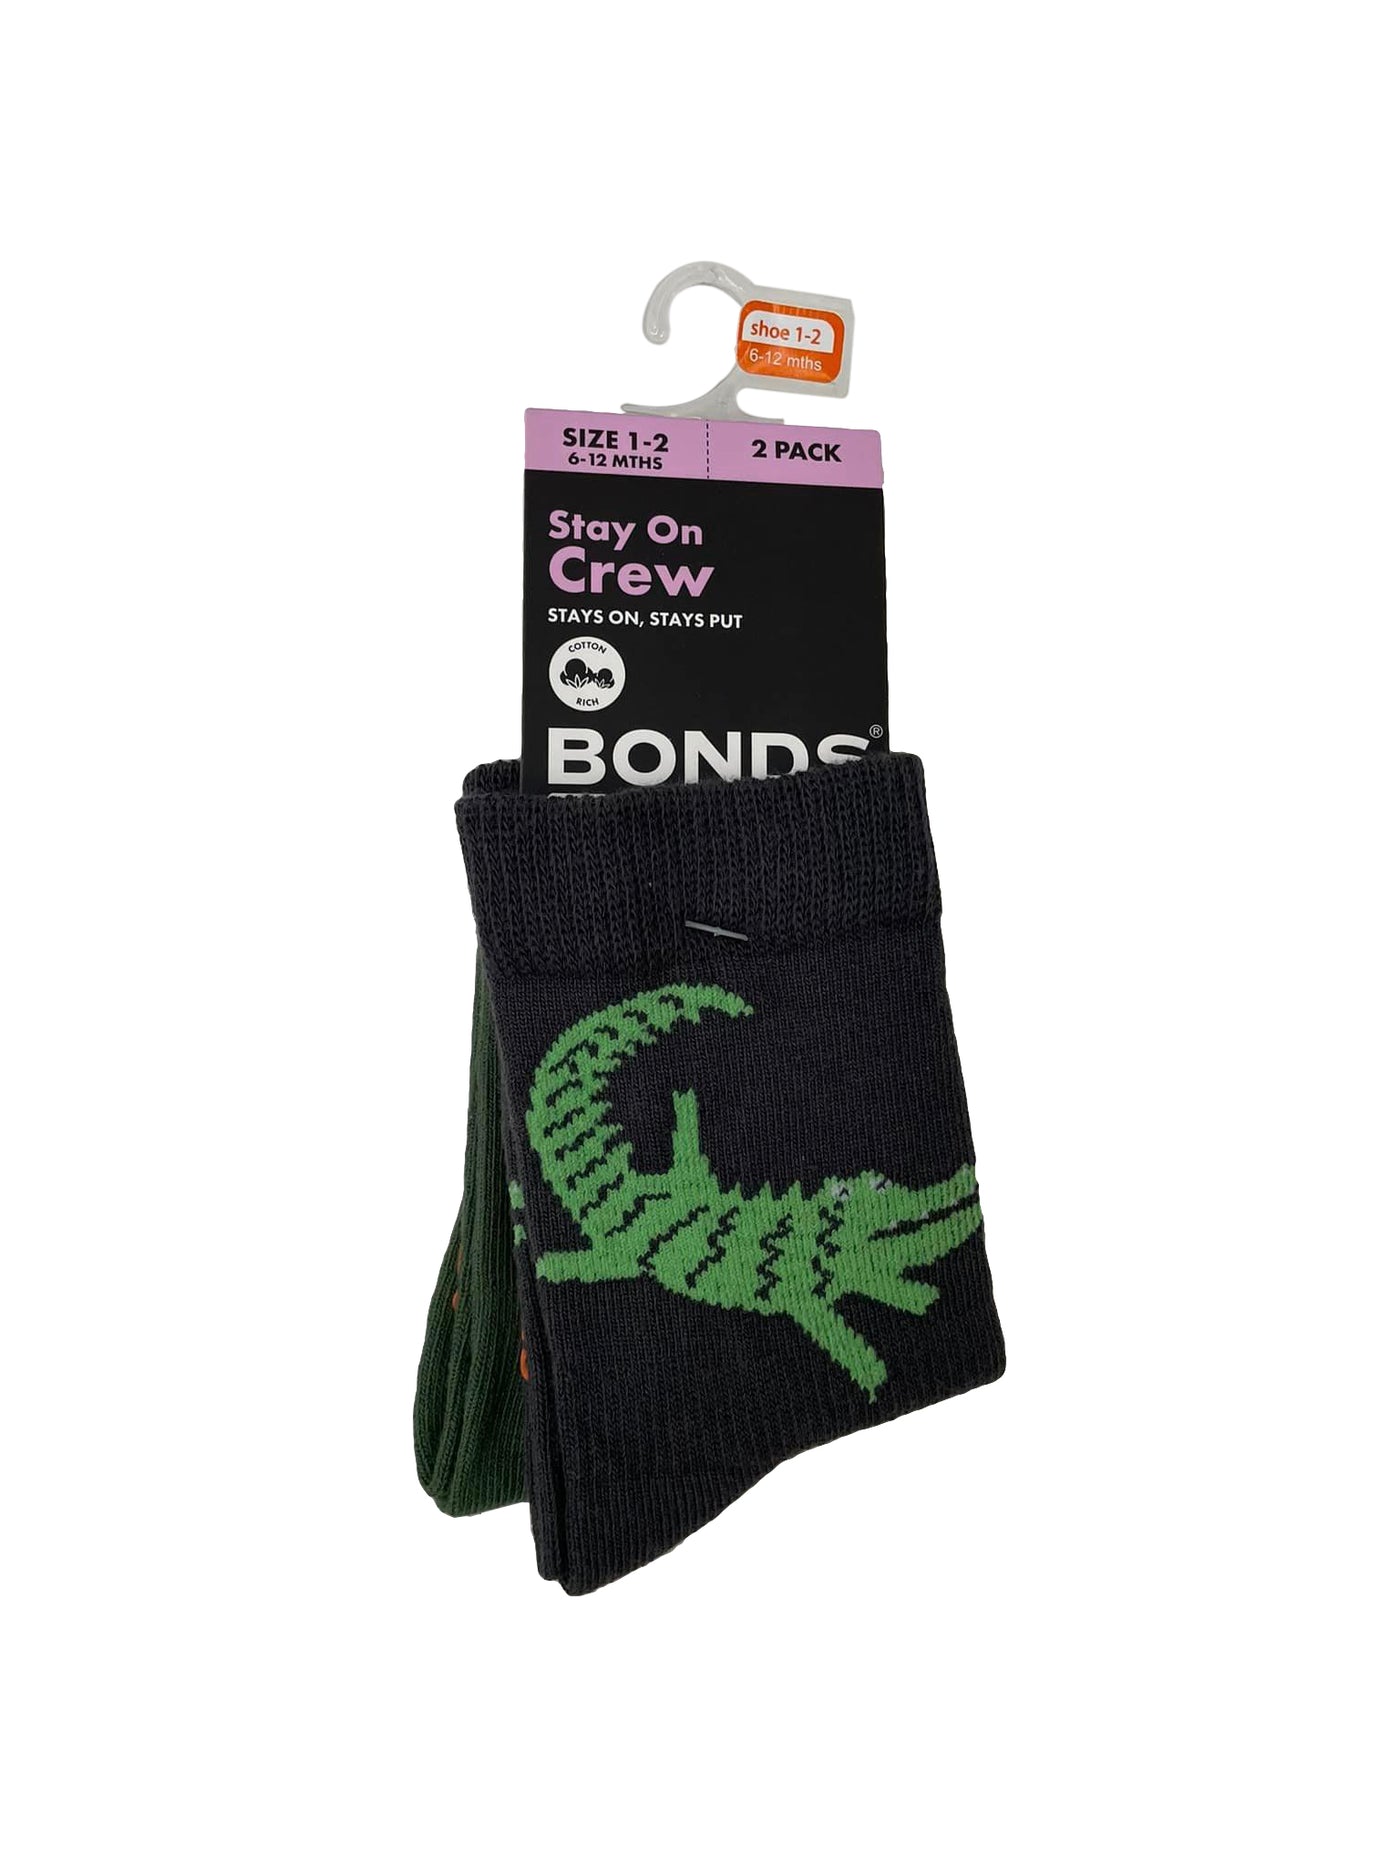 Bonds Baby Stay On Crew Socks 2 Pack - Croc Charcoal/Blade Green